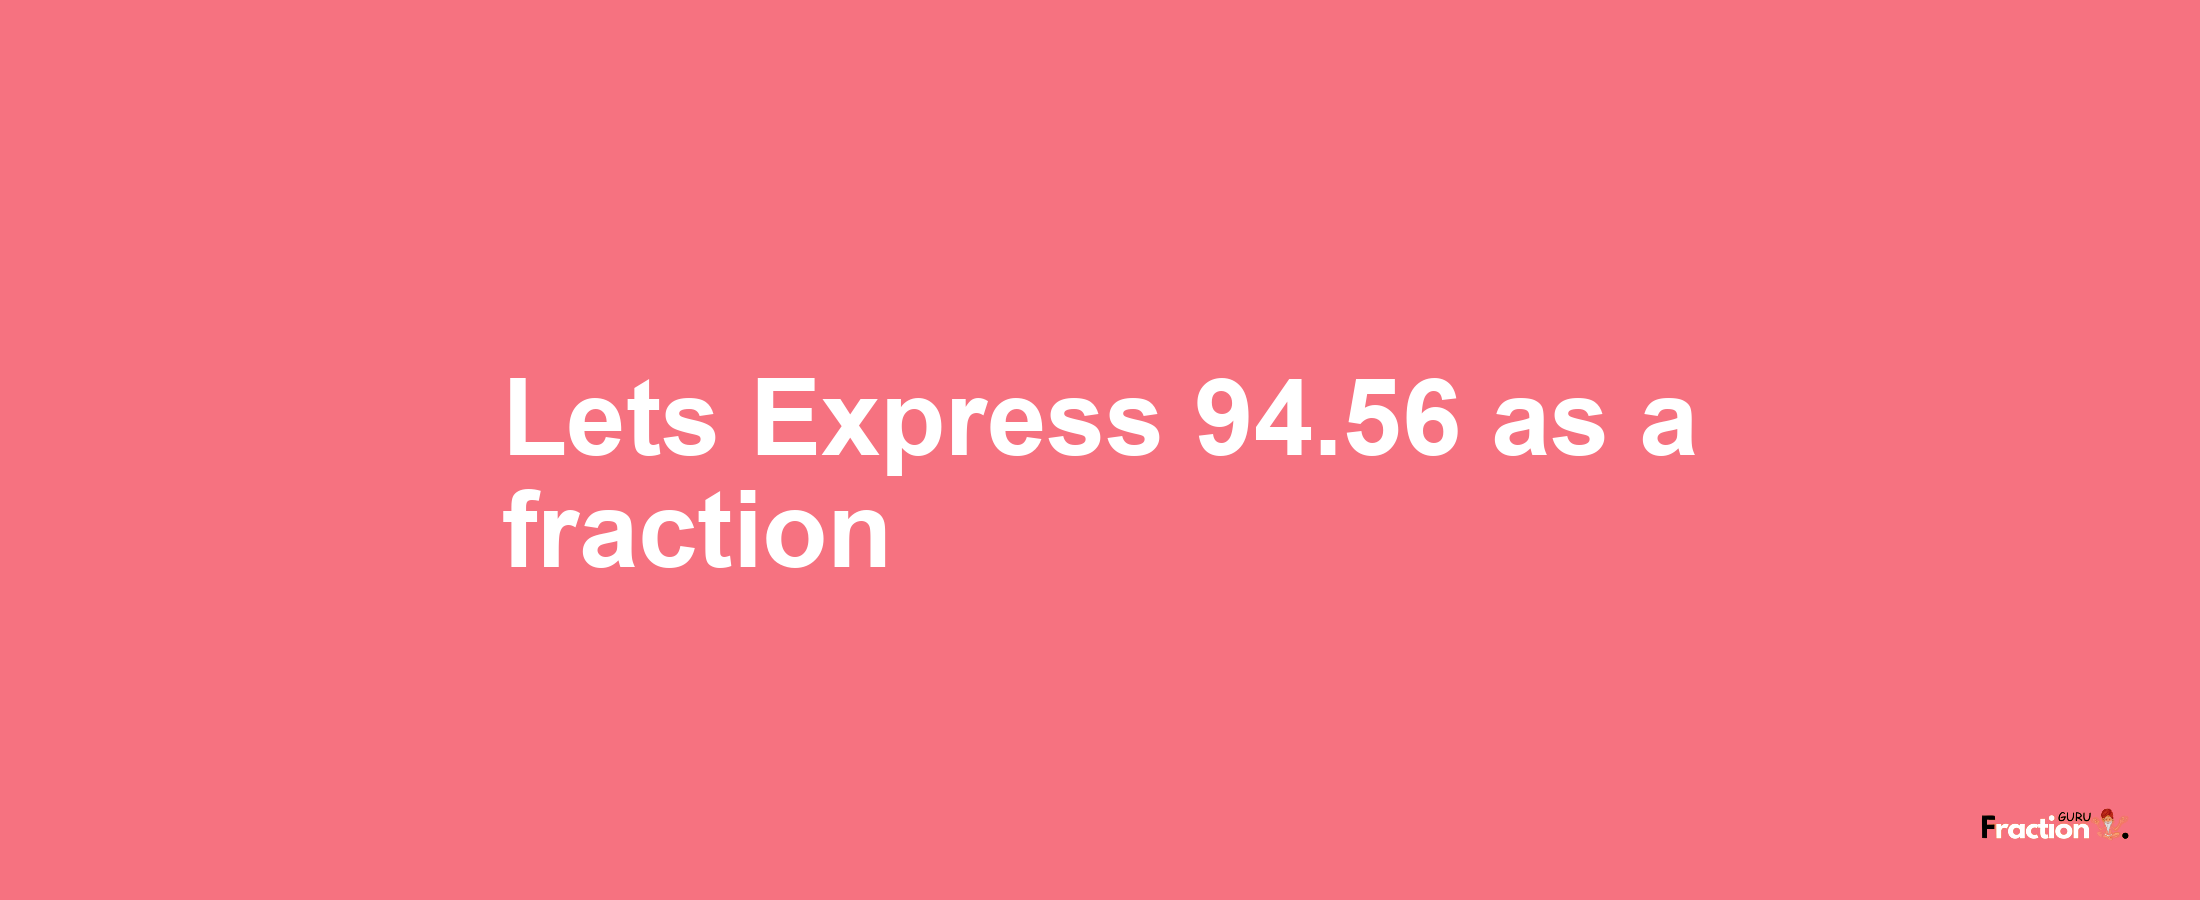 Lets Express 94.56 as afraction